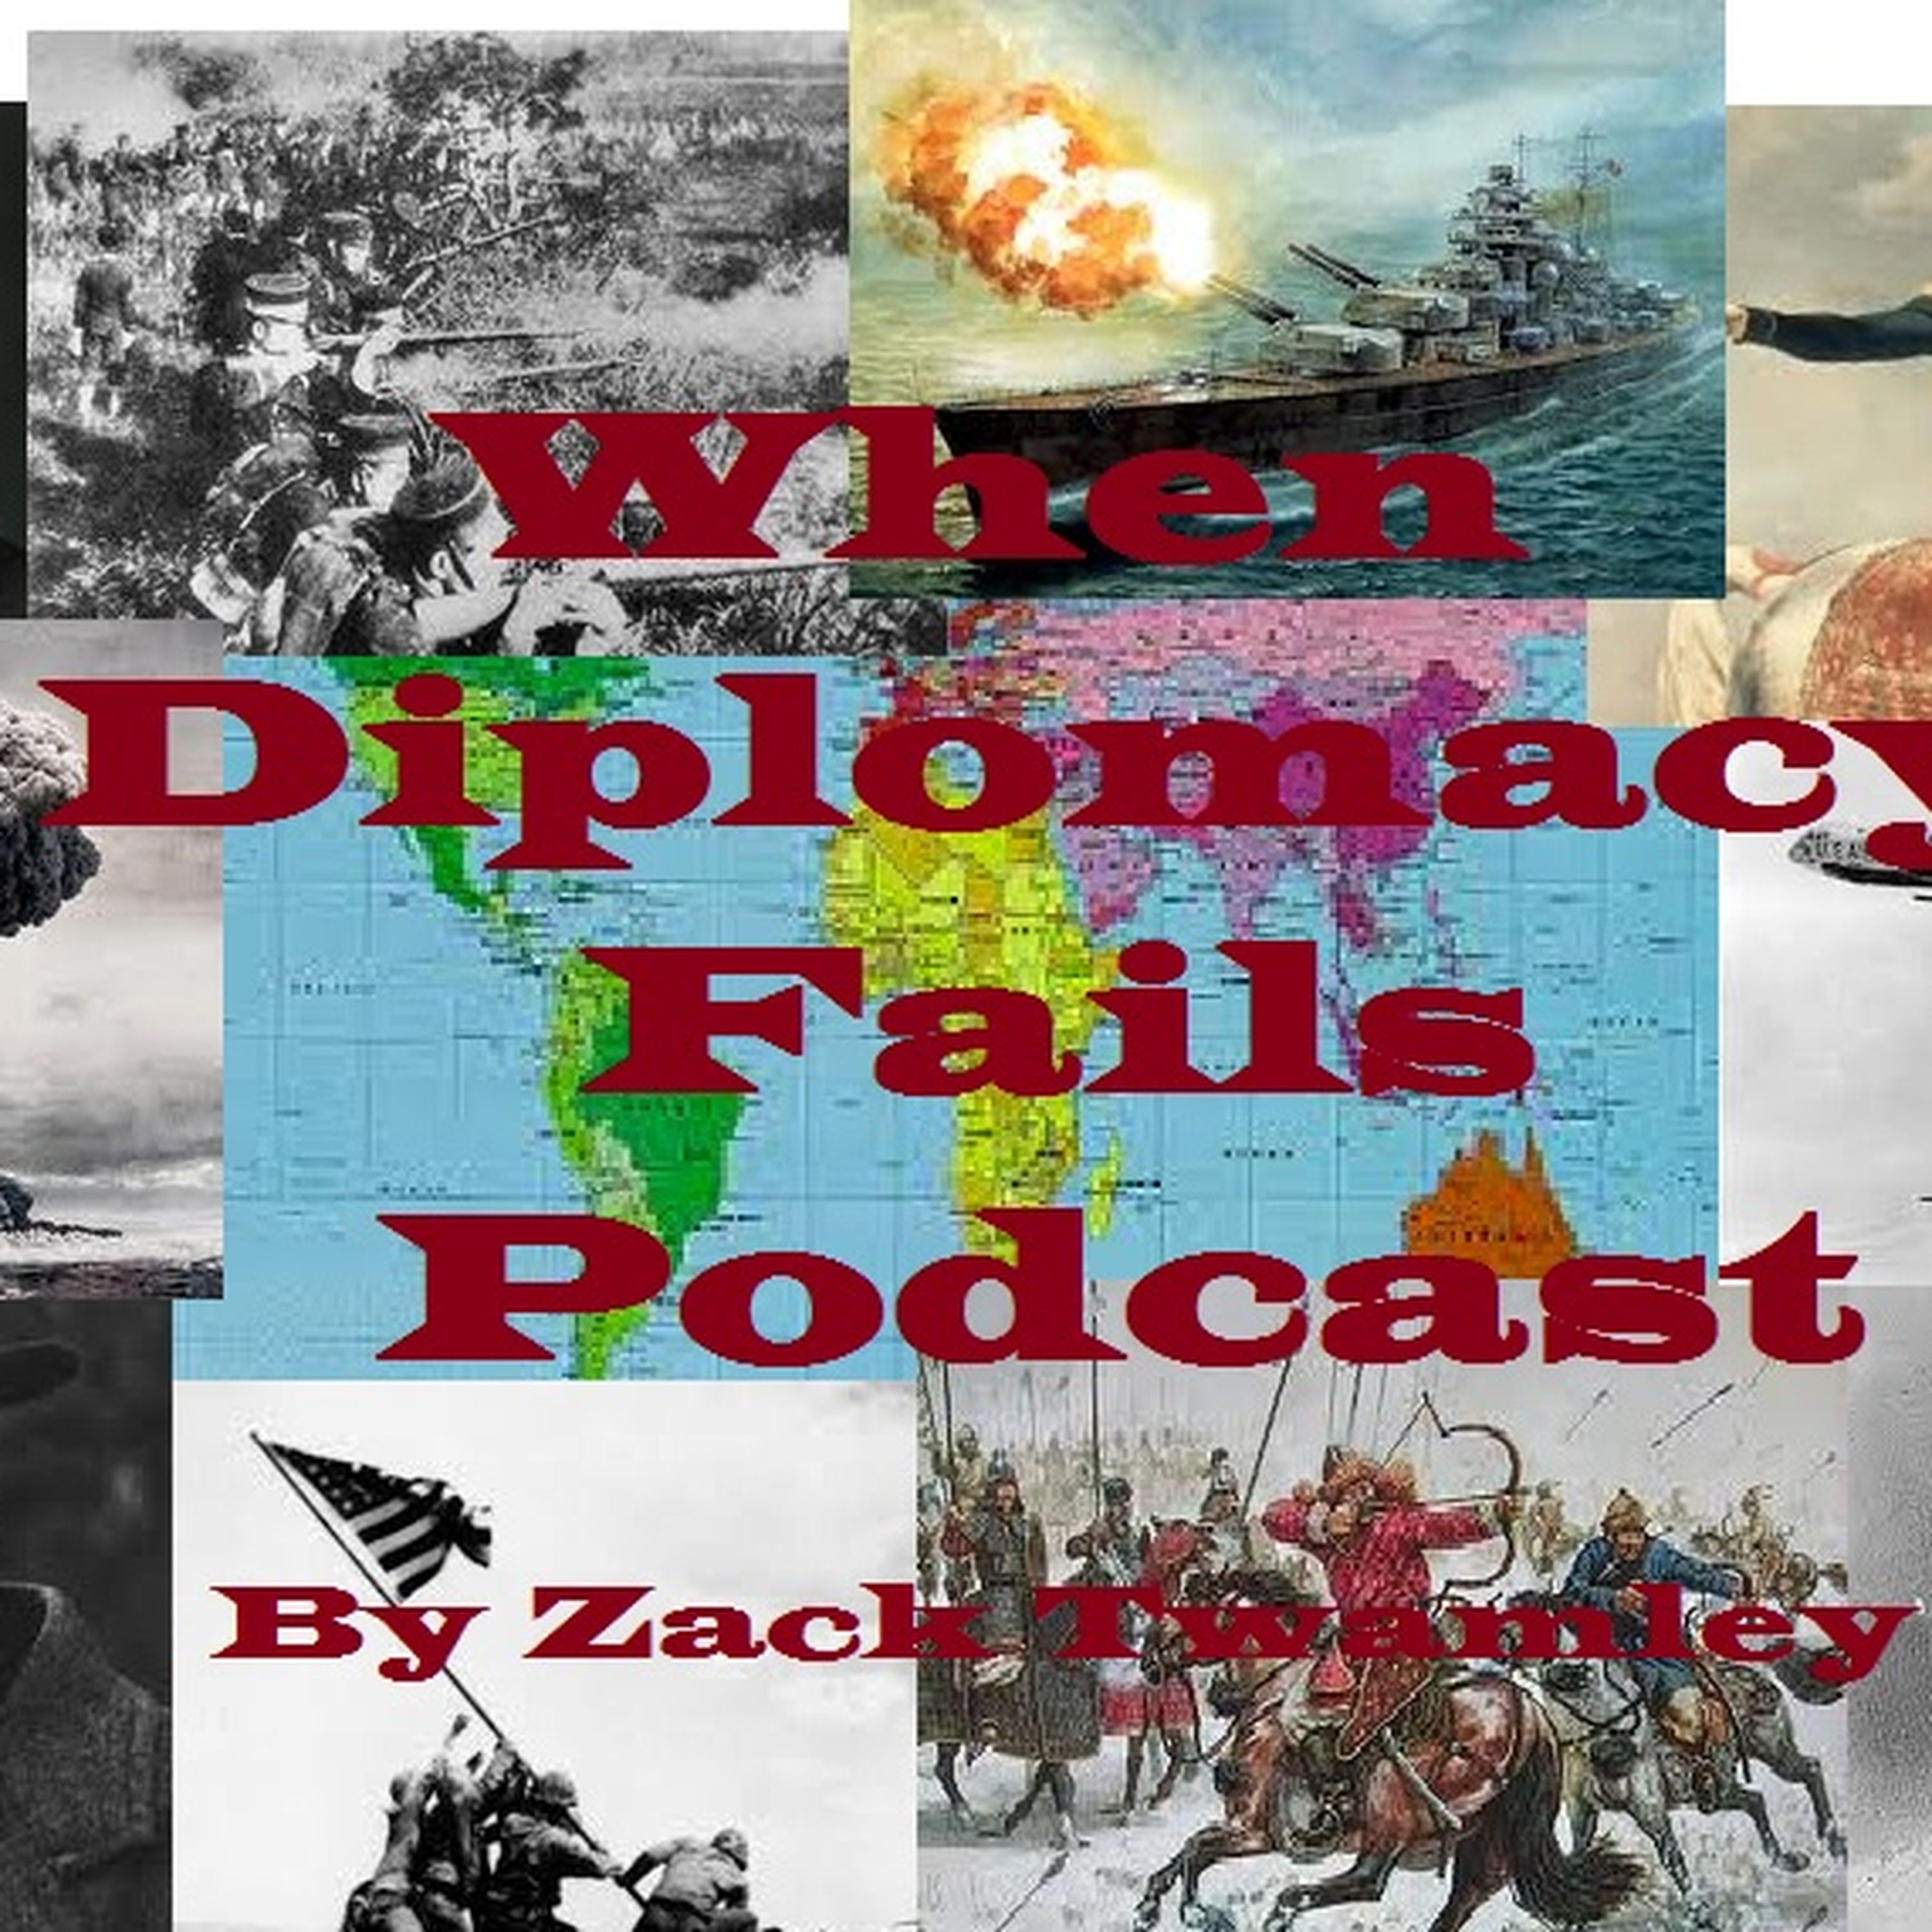 WDF 26.8: The First Anglo-Dutch War IV